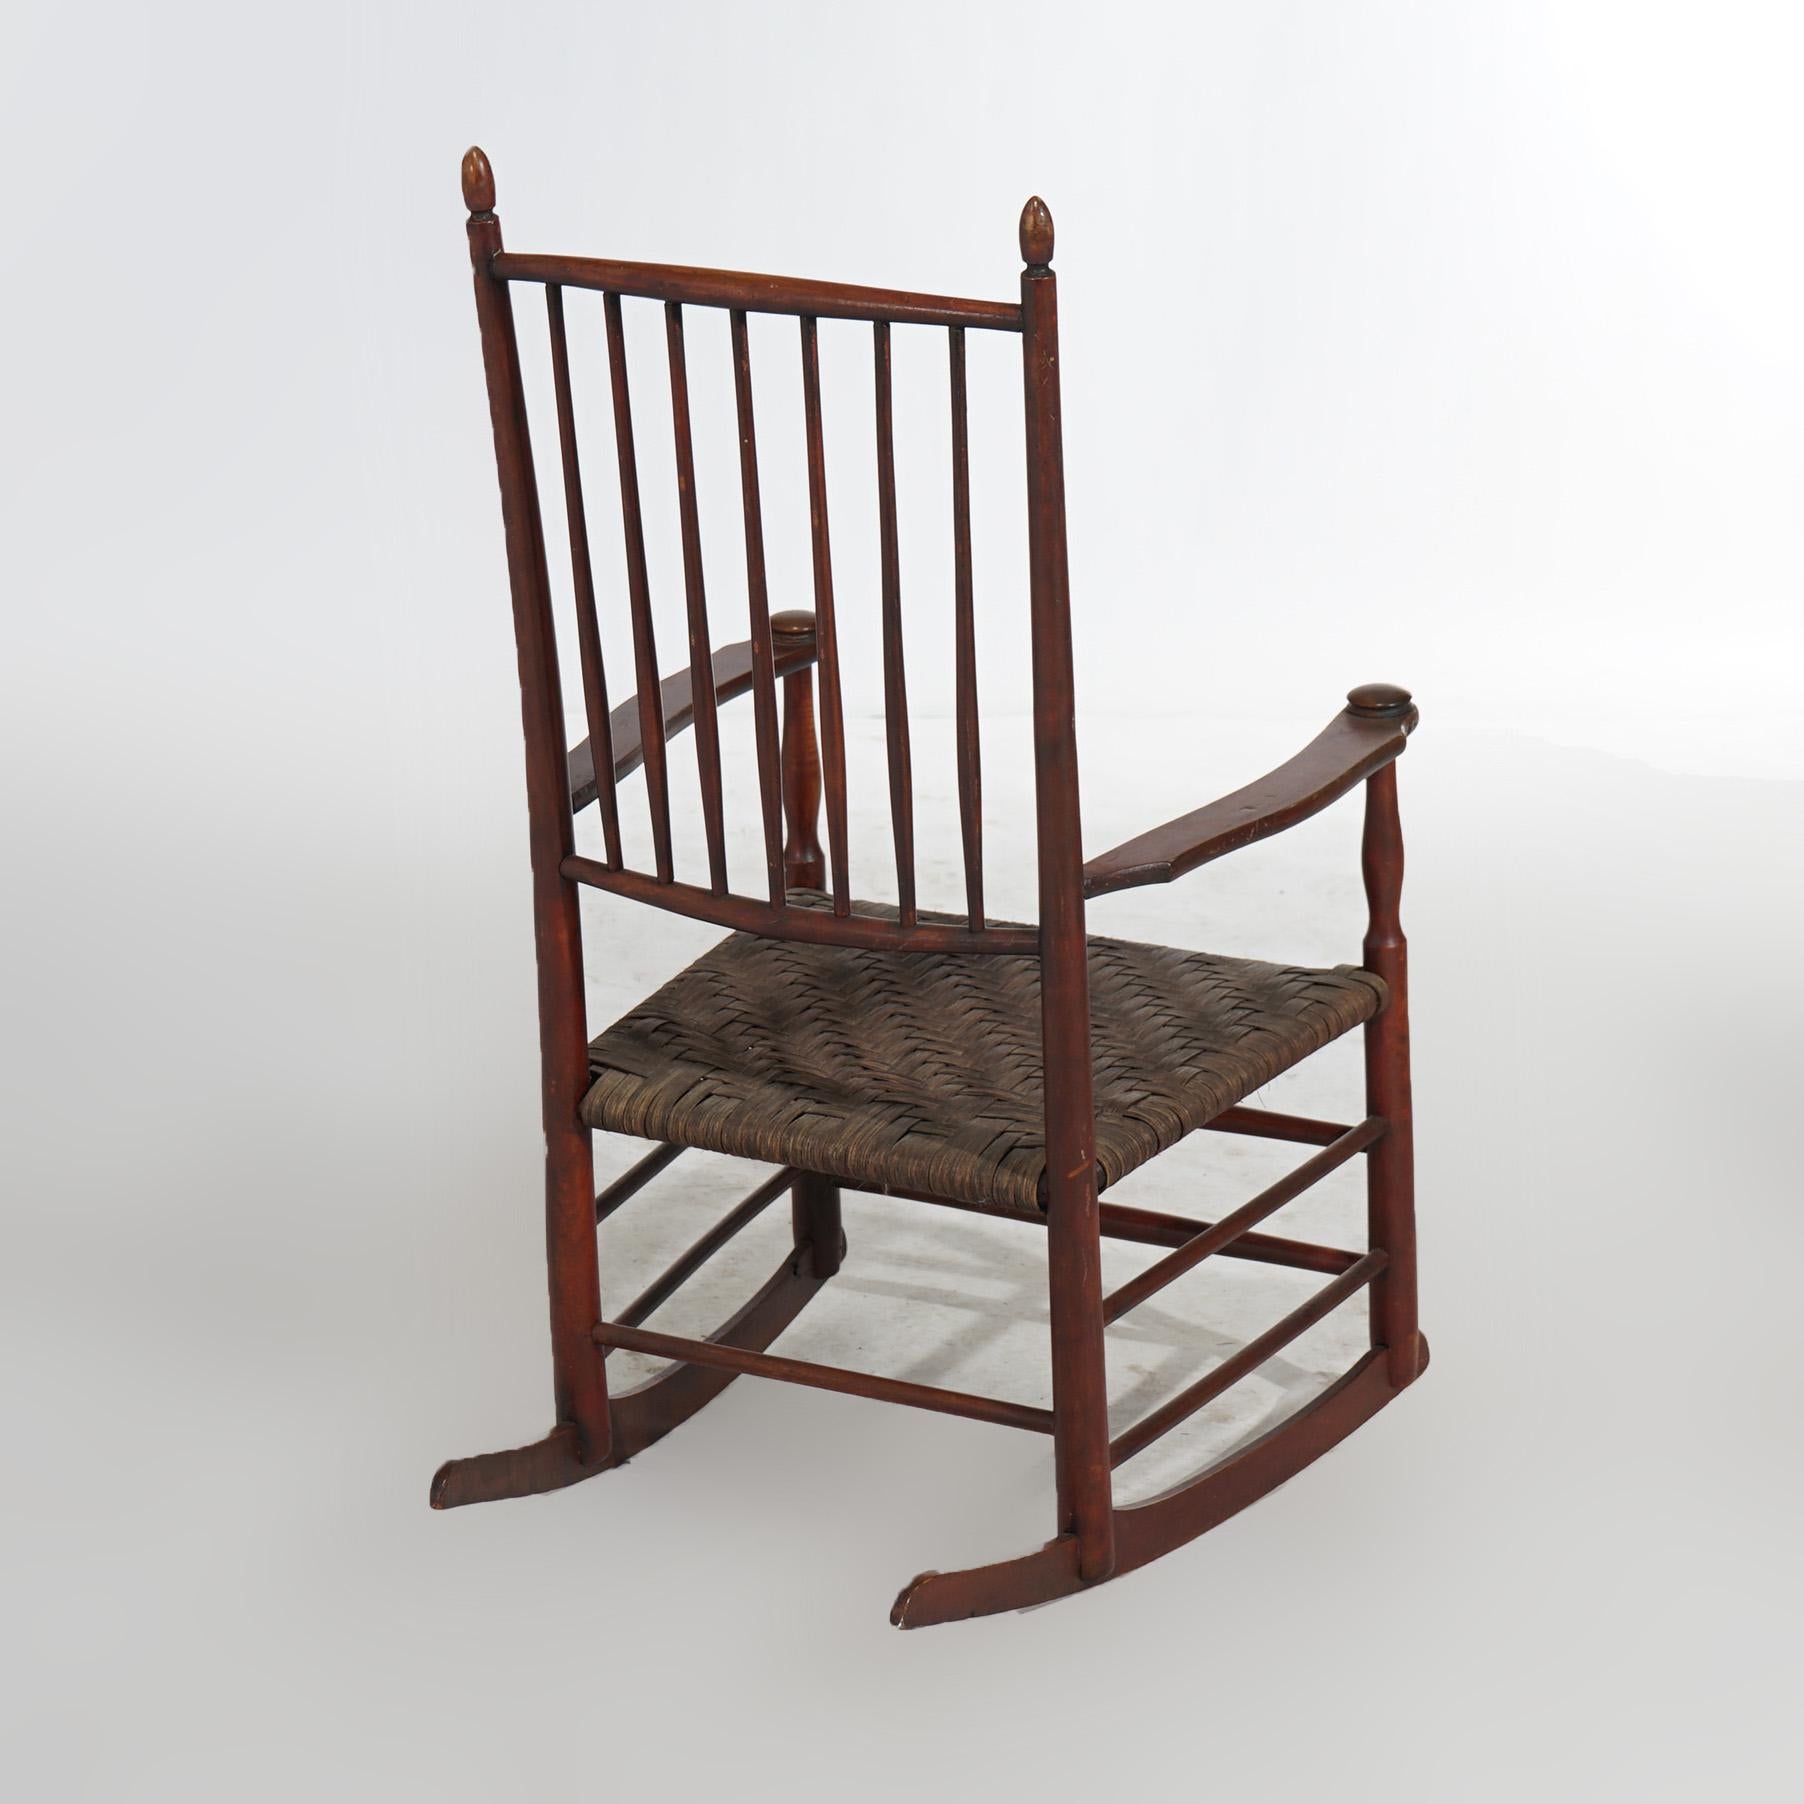 19th Century Antique Shaker Rocking Chair with Thatch Rush Seat, 19th C